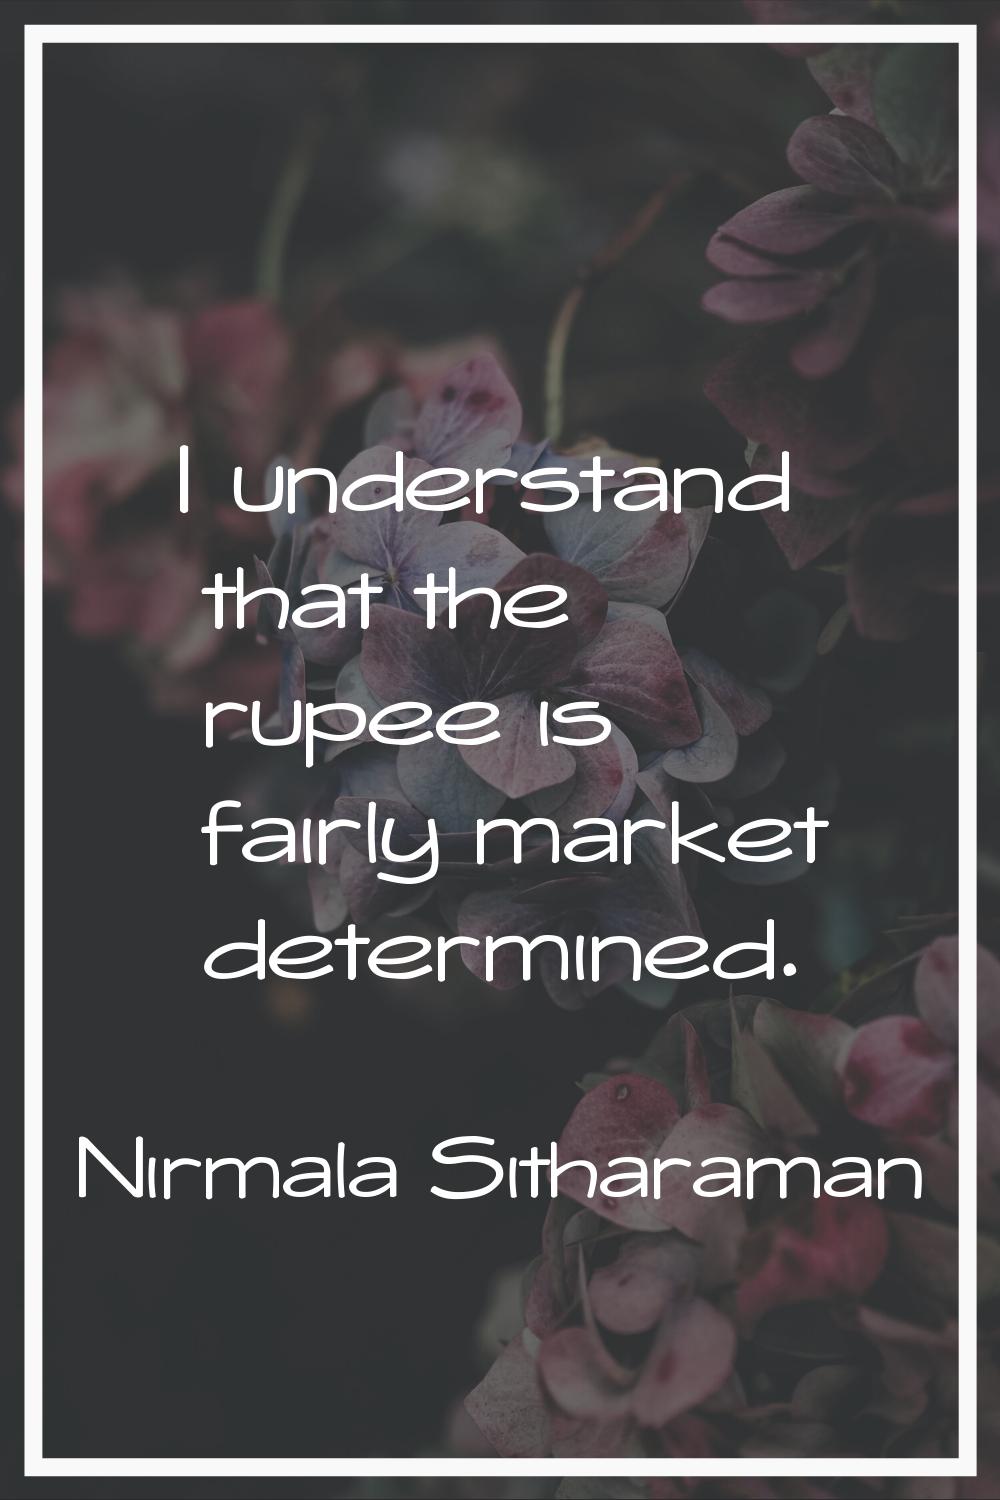 I understand that the rupee is fairly market determined.